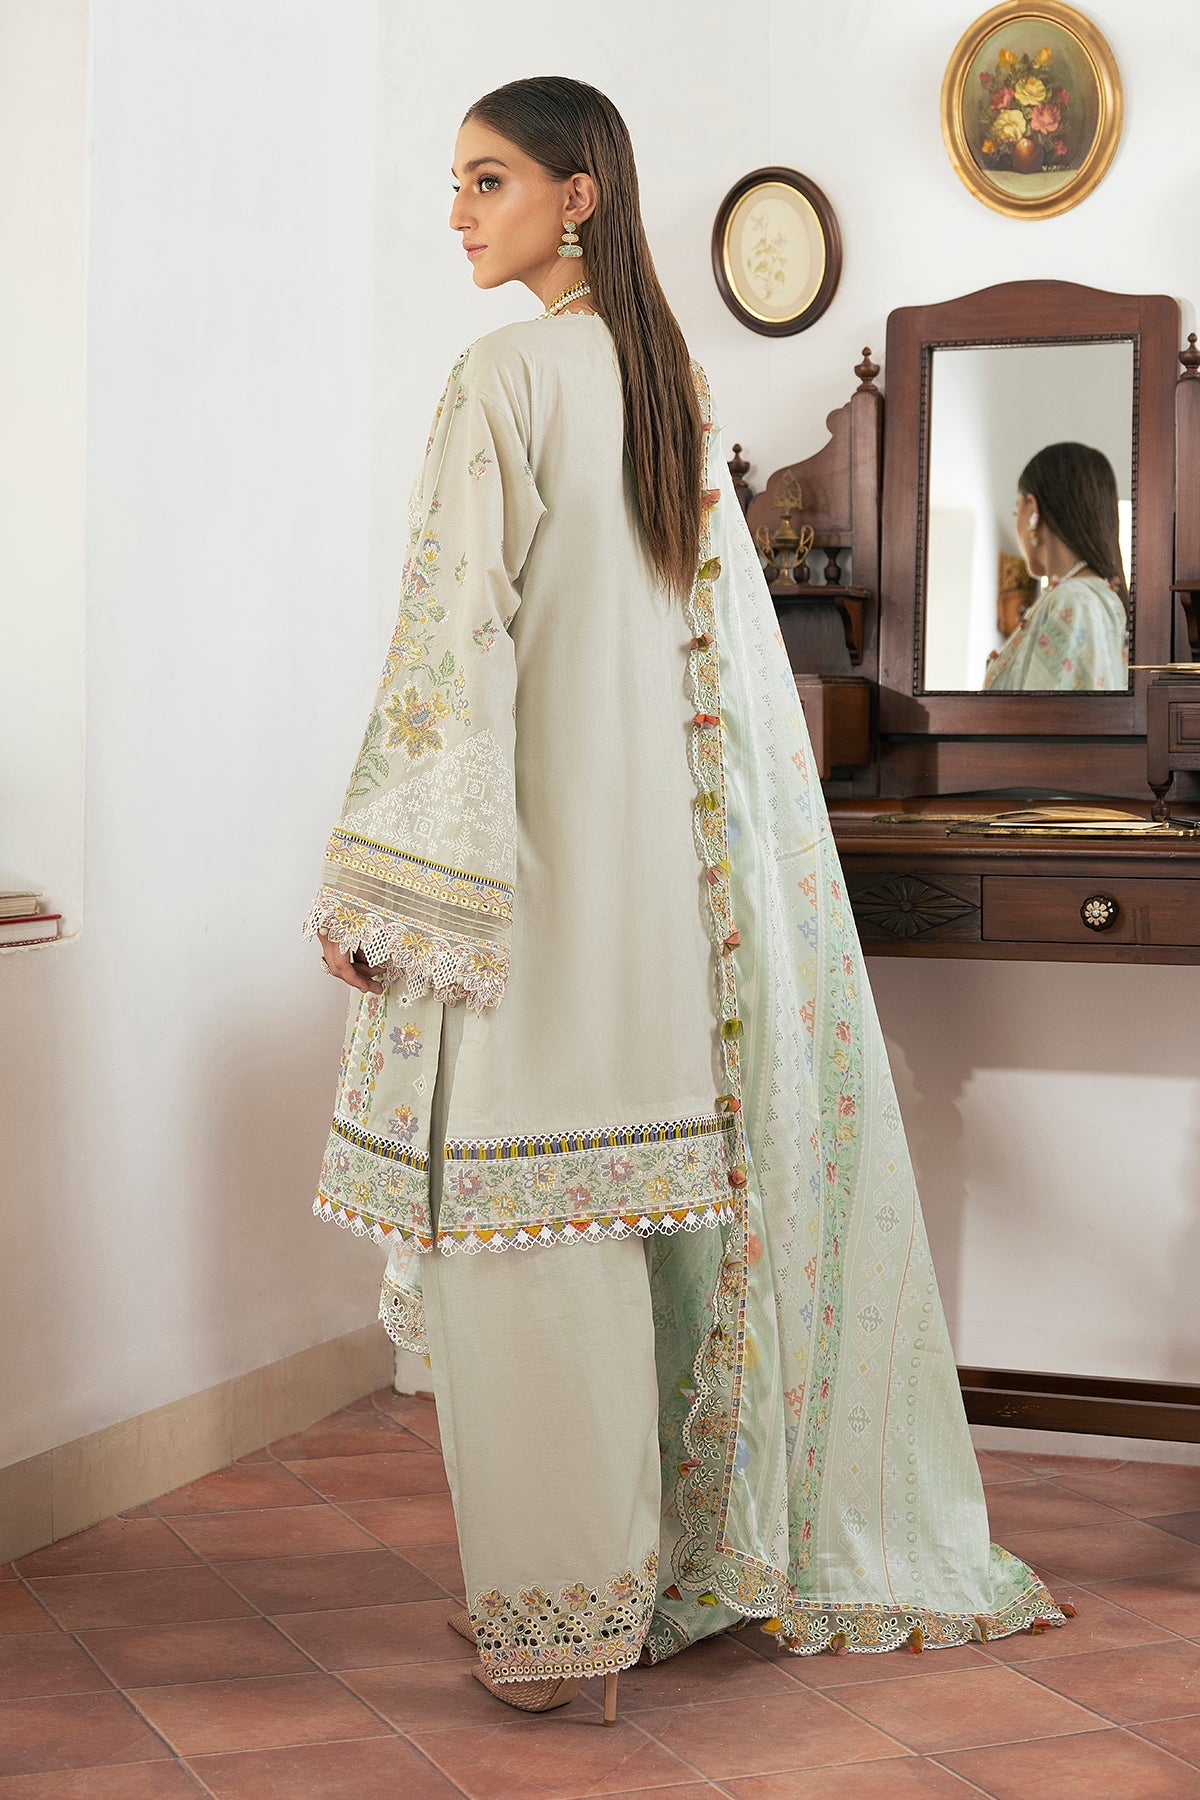 Shop Now, D-07 - Embroidered Swiss Lawn 2023 - Baroque - Shahana Collection UK - Wedding and Bridal Party Dresses 